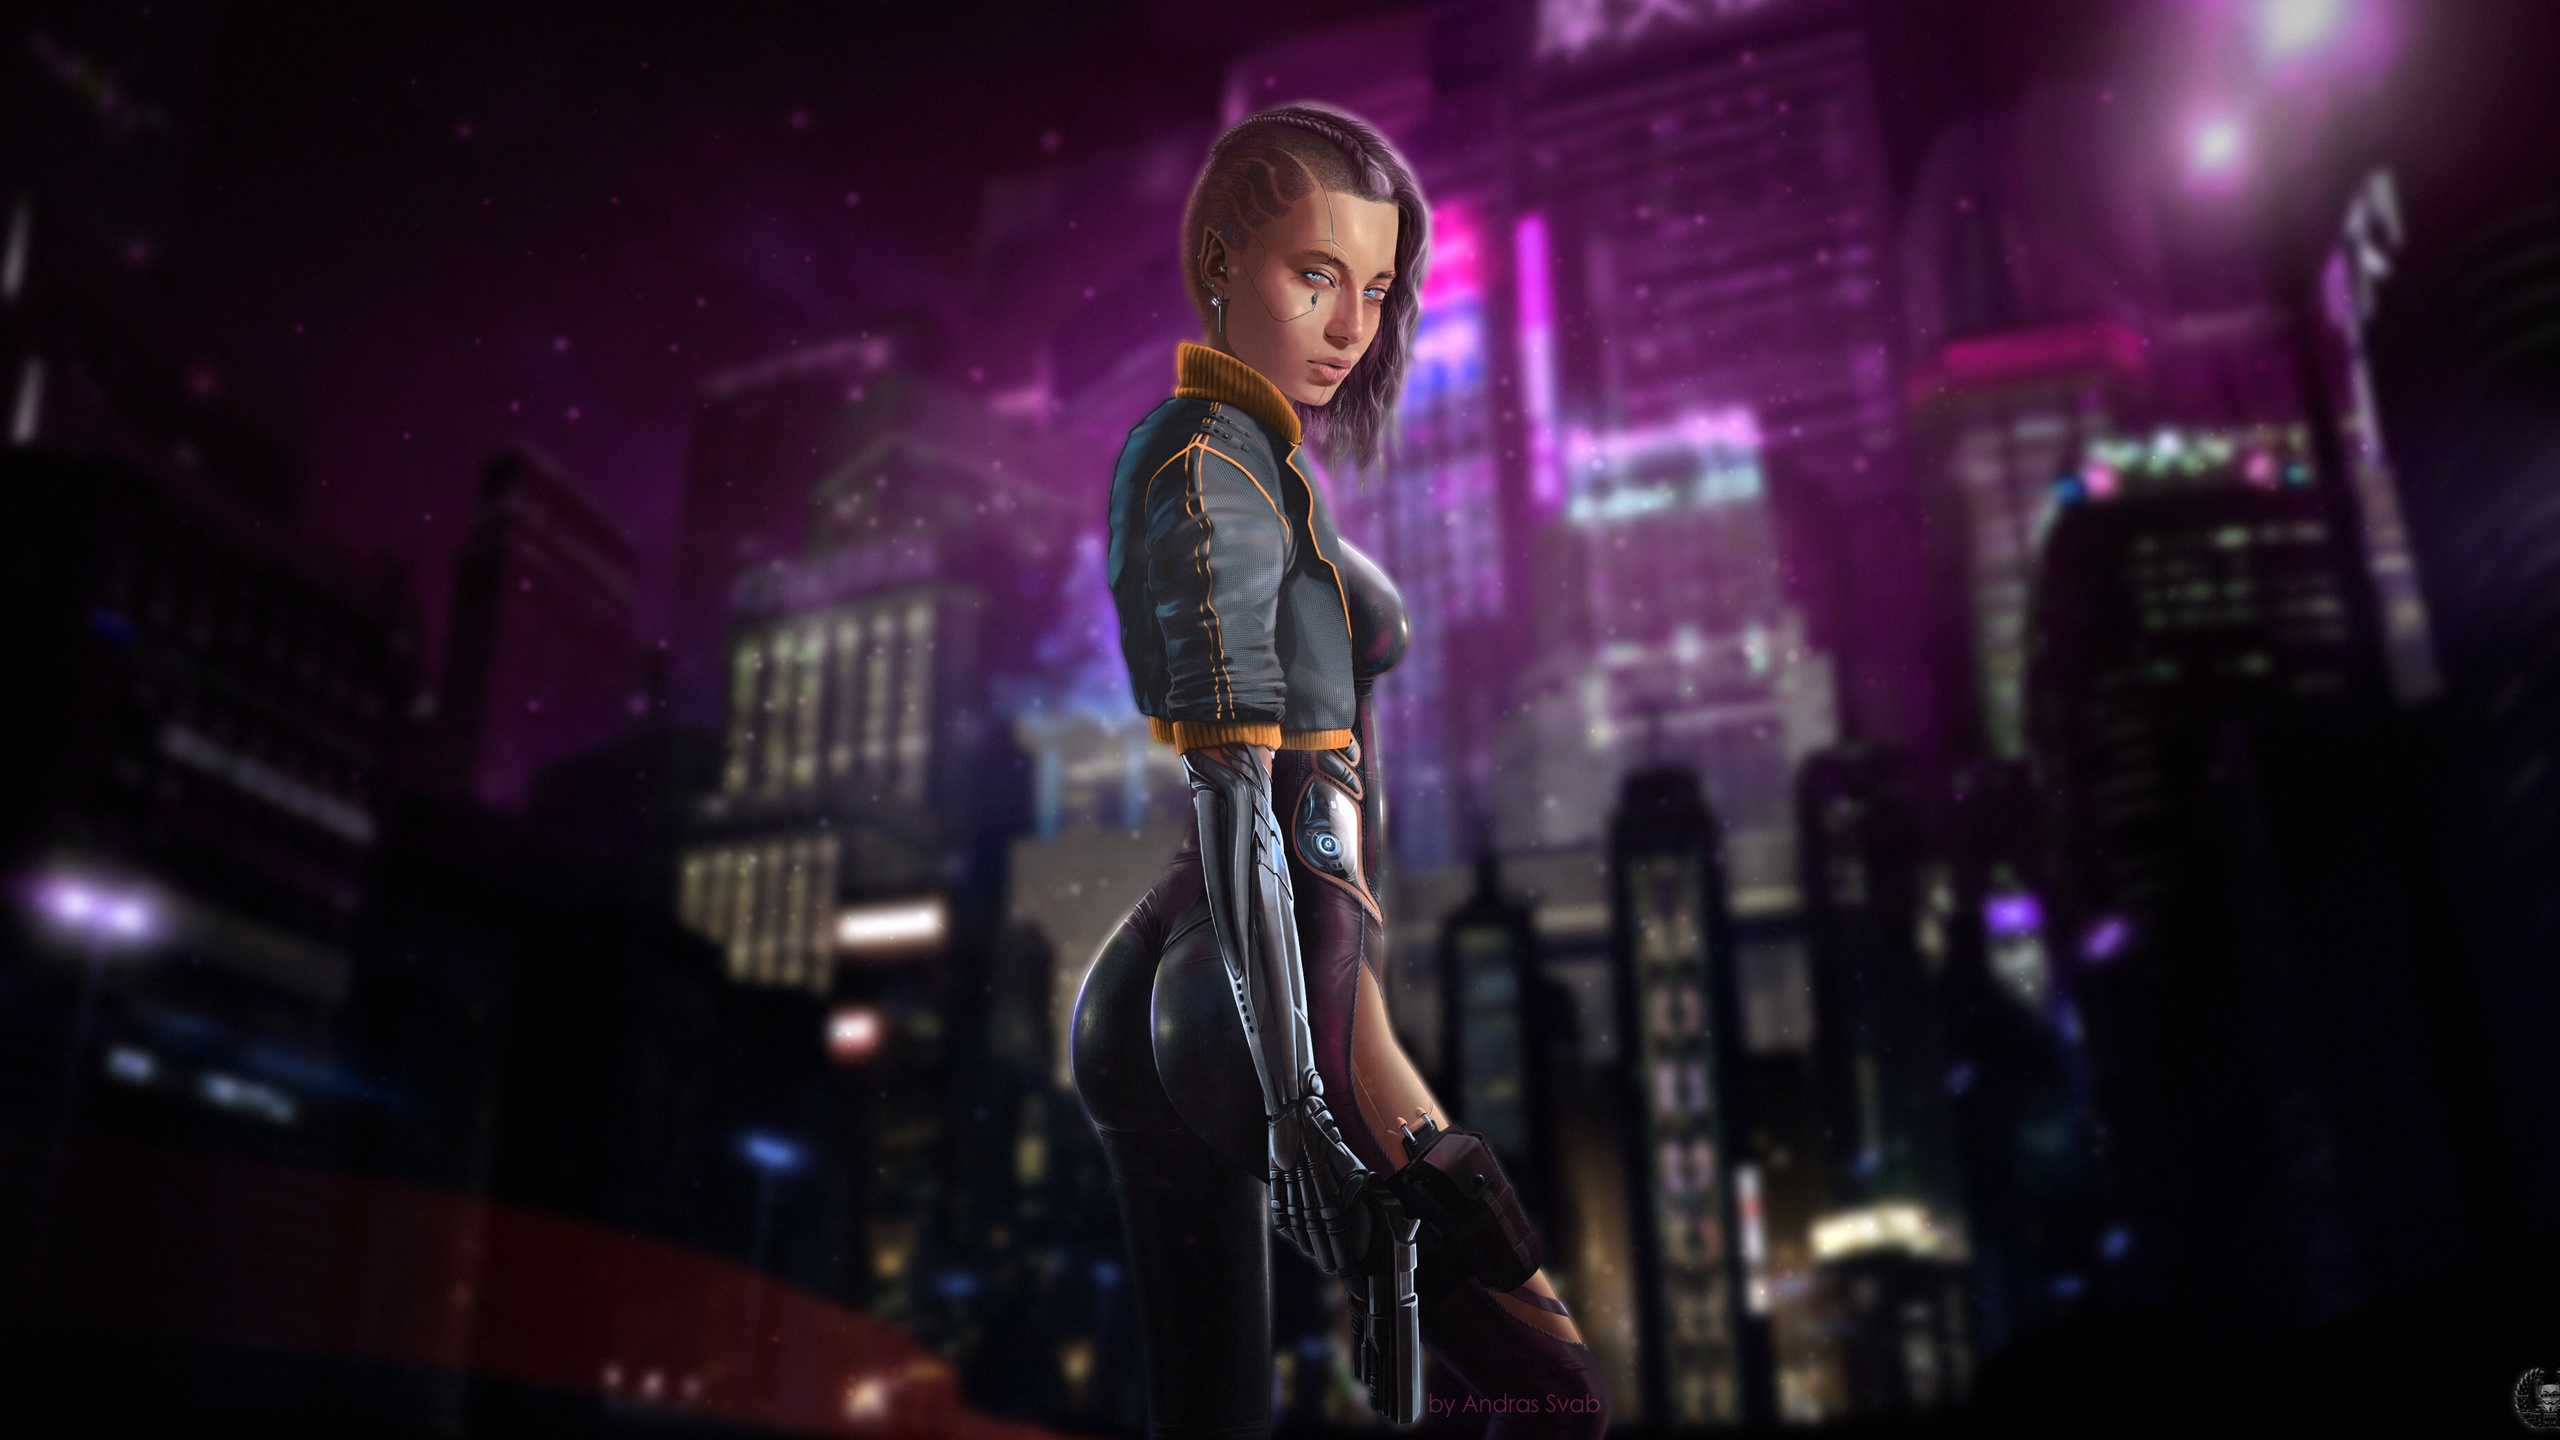 Cyborg Girl Cyberpunk Neon 4k 1440P Resolution HD 4k Wallpaper, Image, Background, Photo and Picture